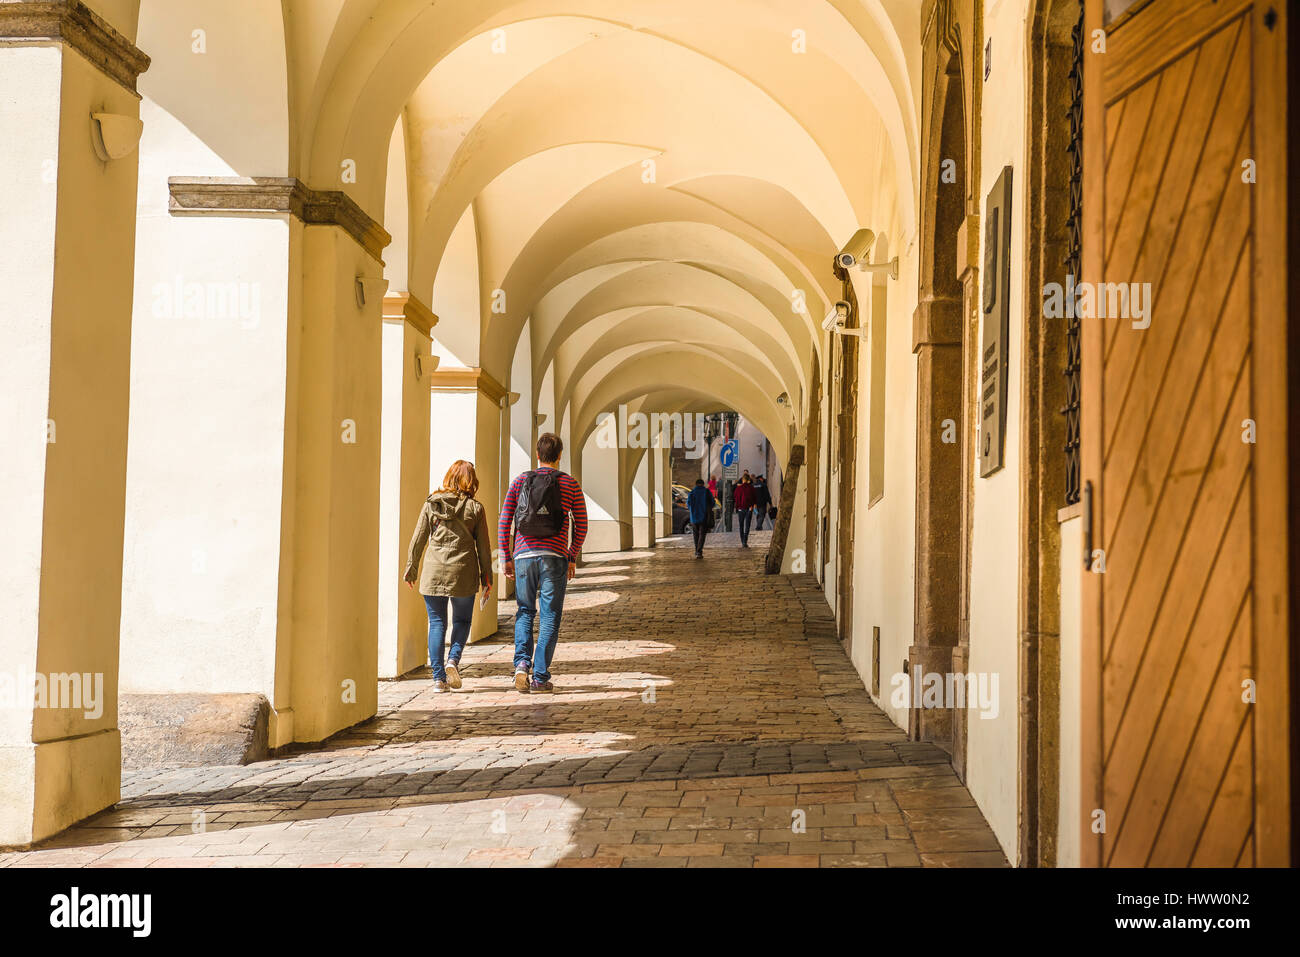 Prague old town arcade, a young couple walk through a typical medieval arcade in the historic Hradcany district of Prague, Czech Republic, Europe. Stock Photo